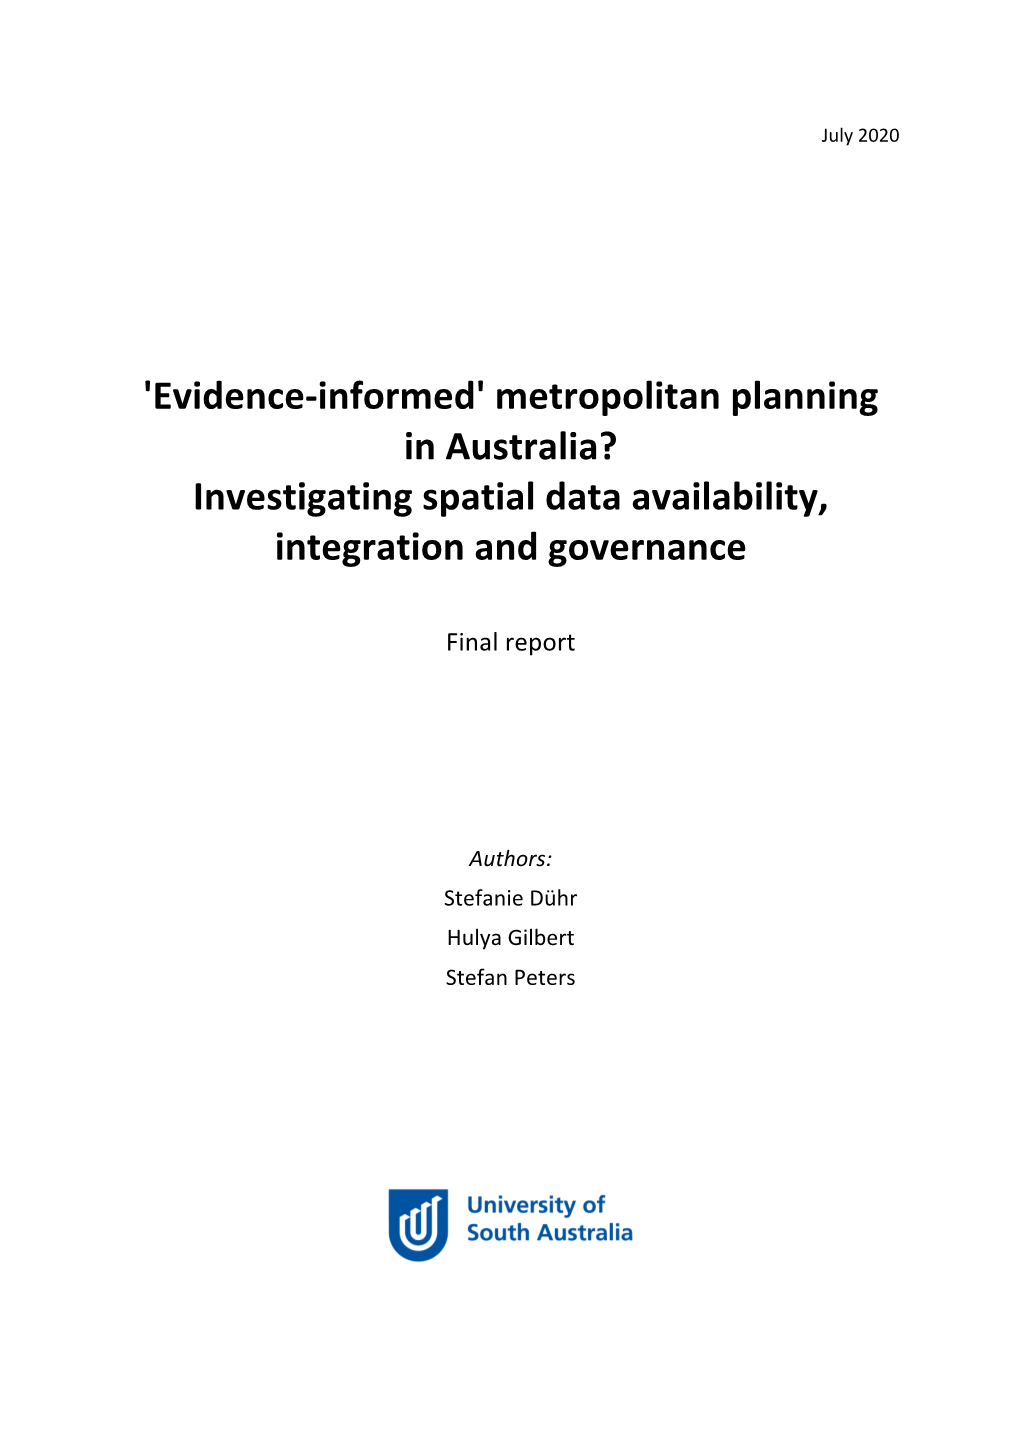 Metropolitan Planning in Australia? Investigating Spatial Data Availability, Integration and Governance